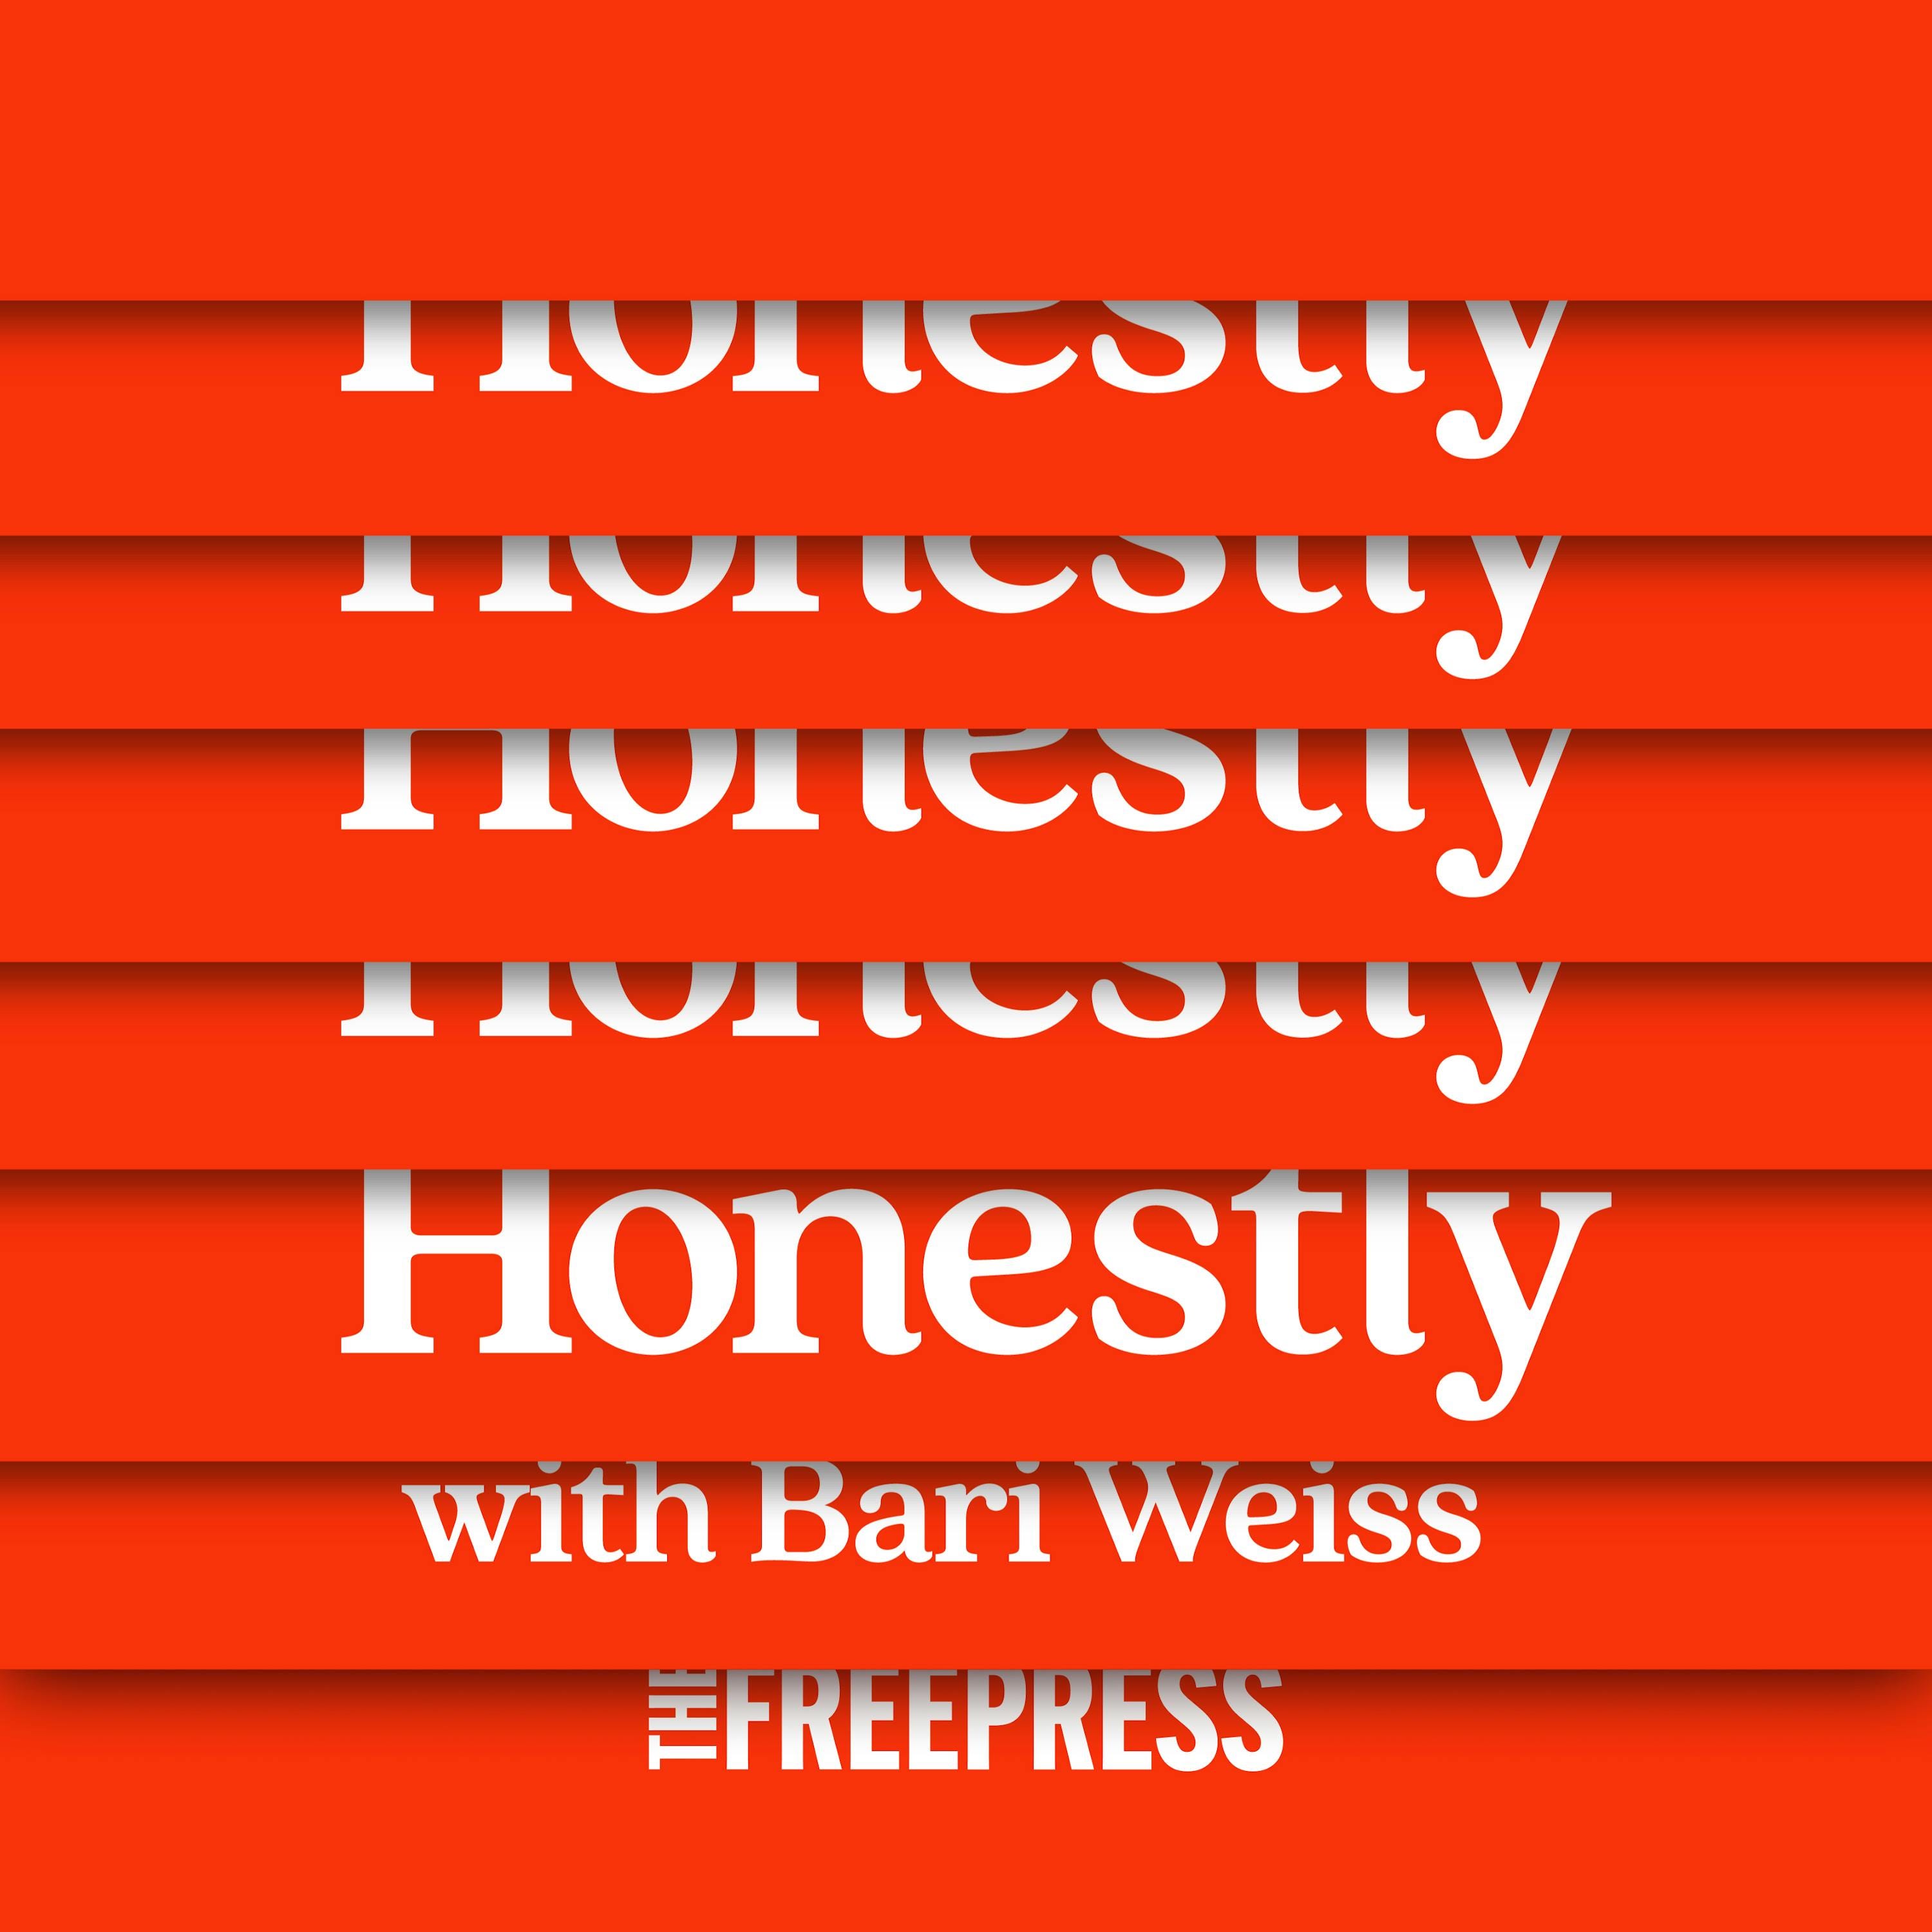 Official Trailer: Honestly with Bari Weiss